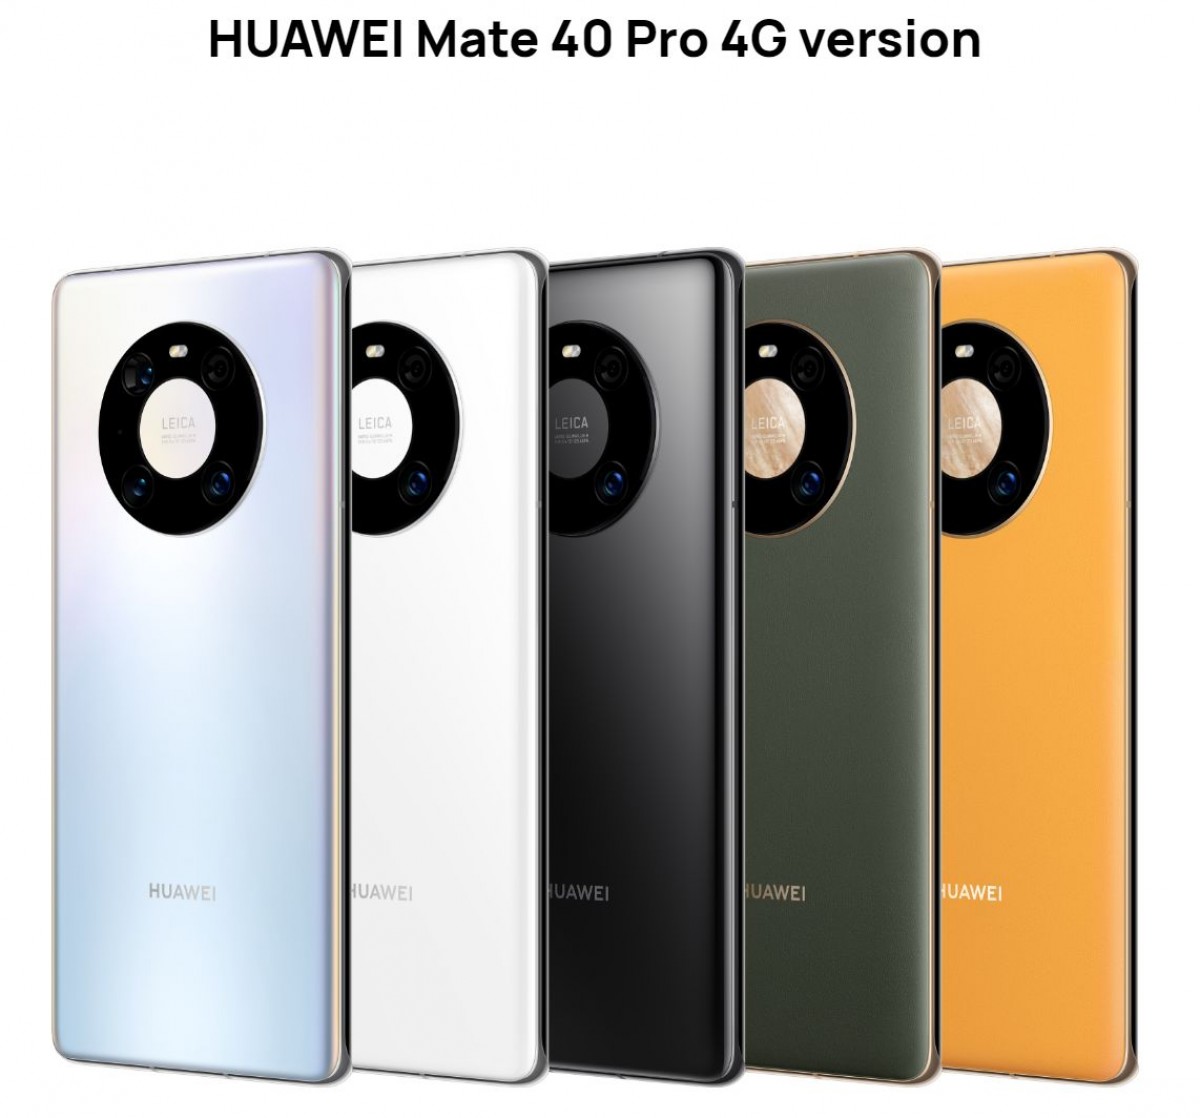 Huawei Mate 40 Pro 4G and Mate X2 4G coming to China